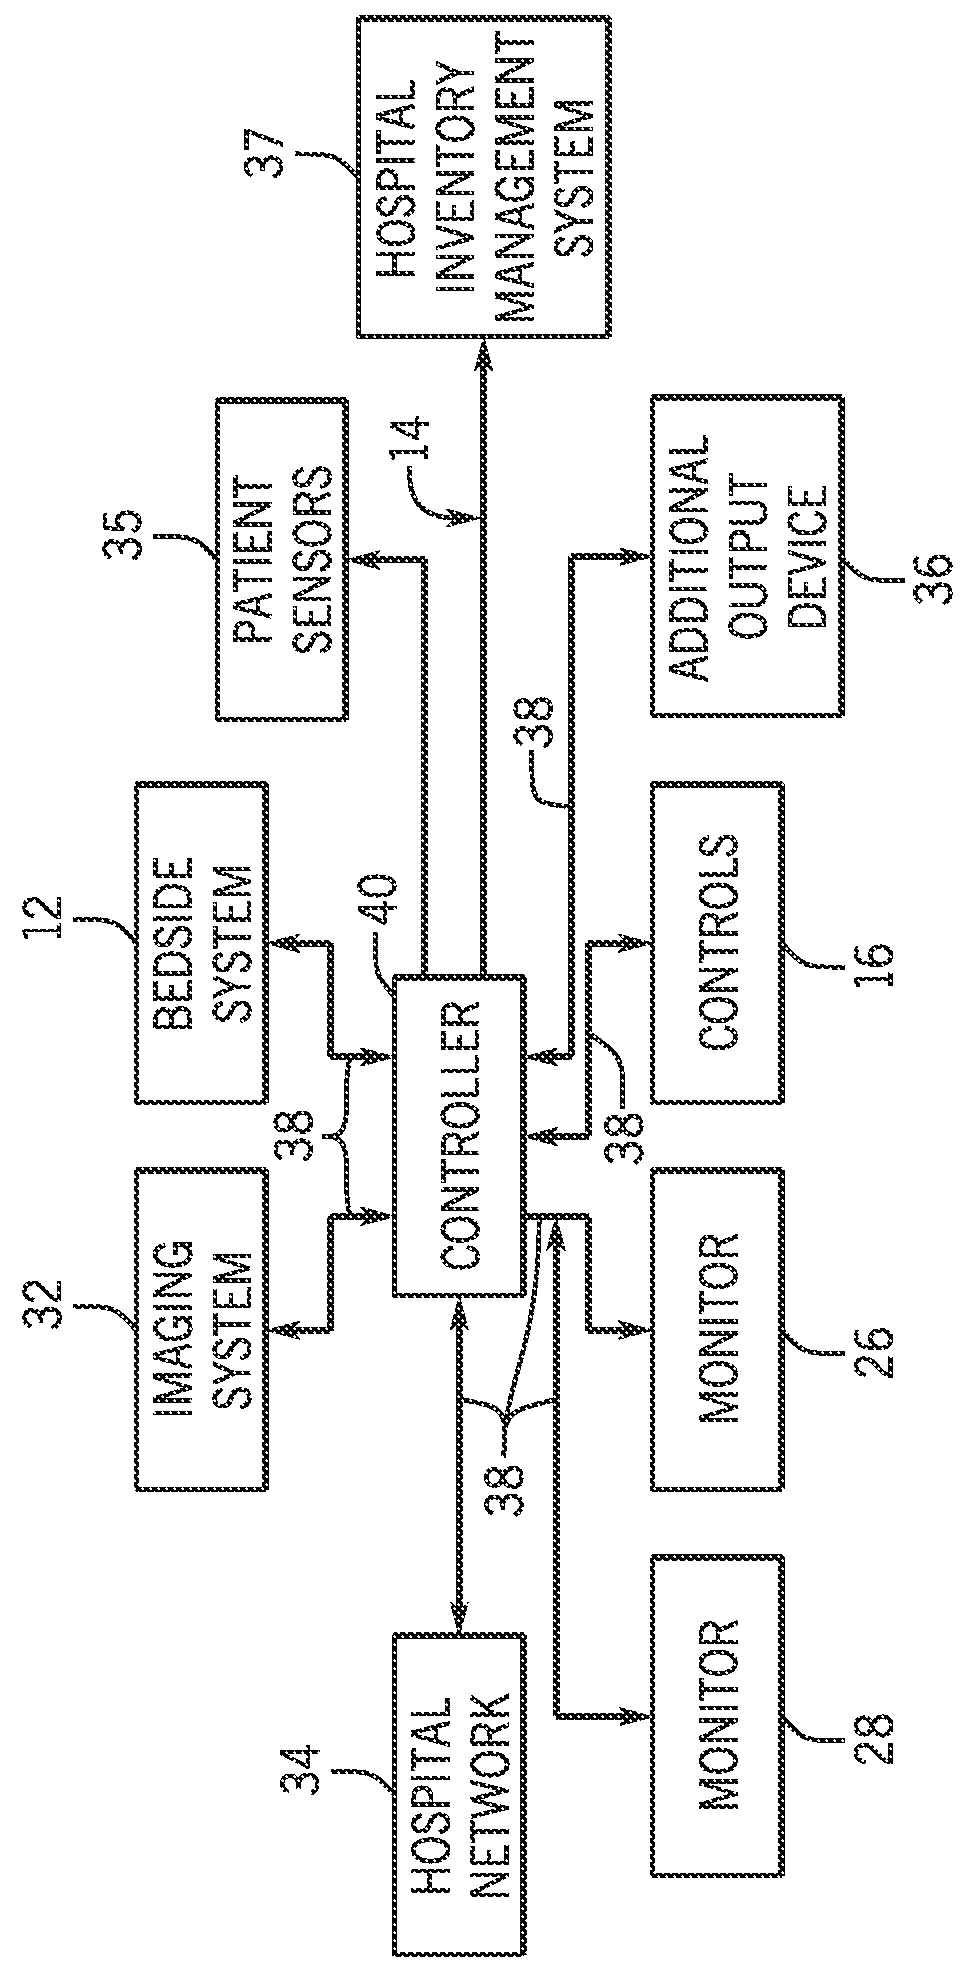 System and method for navigating a guide wire